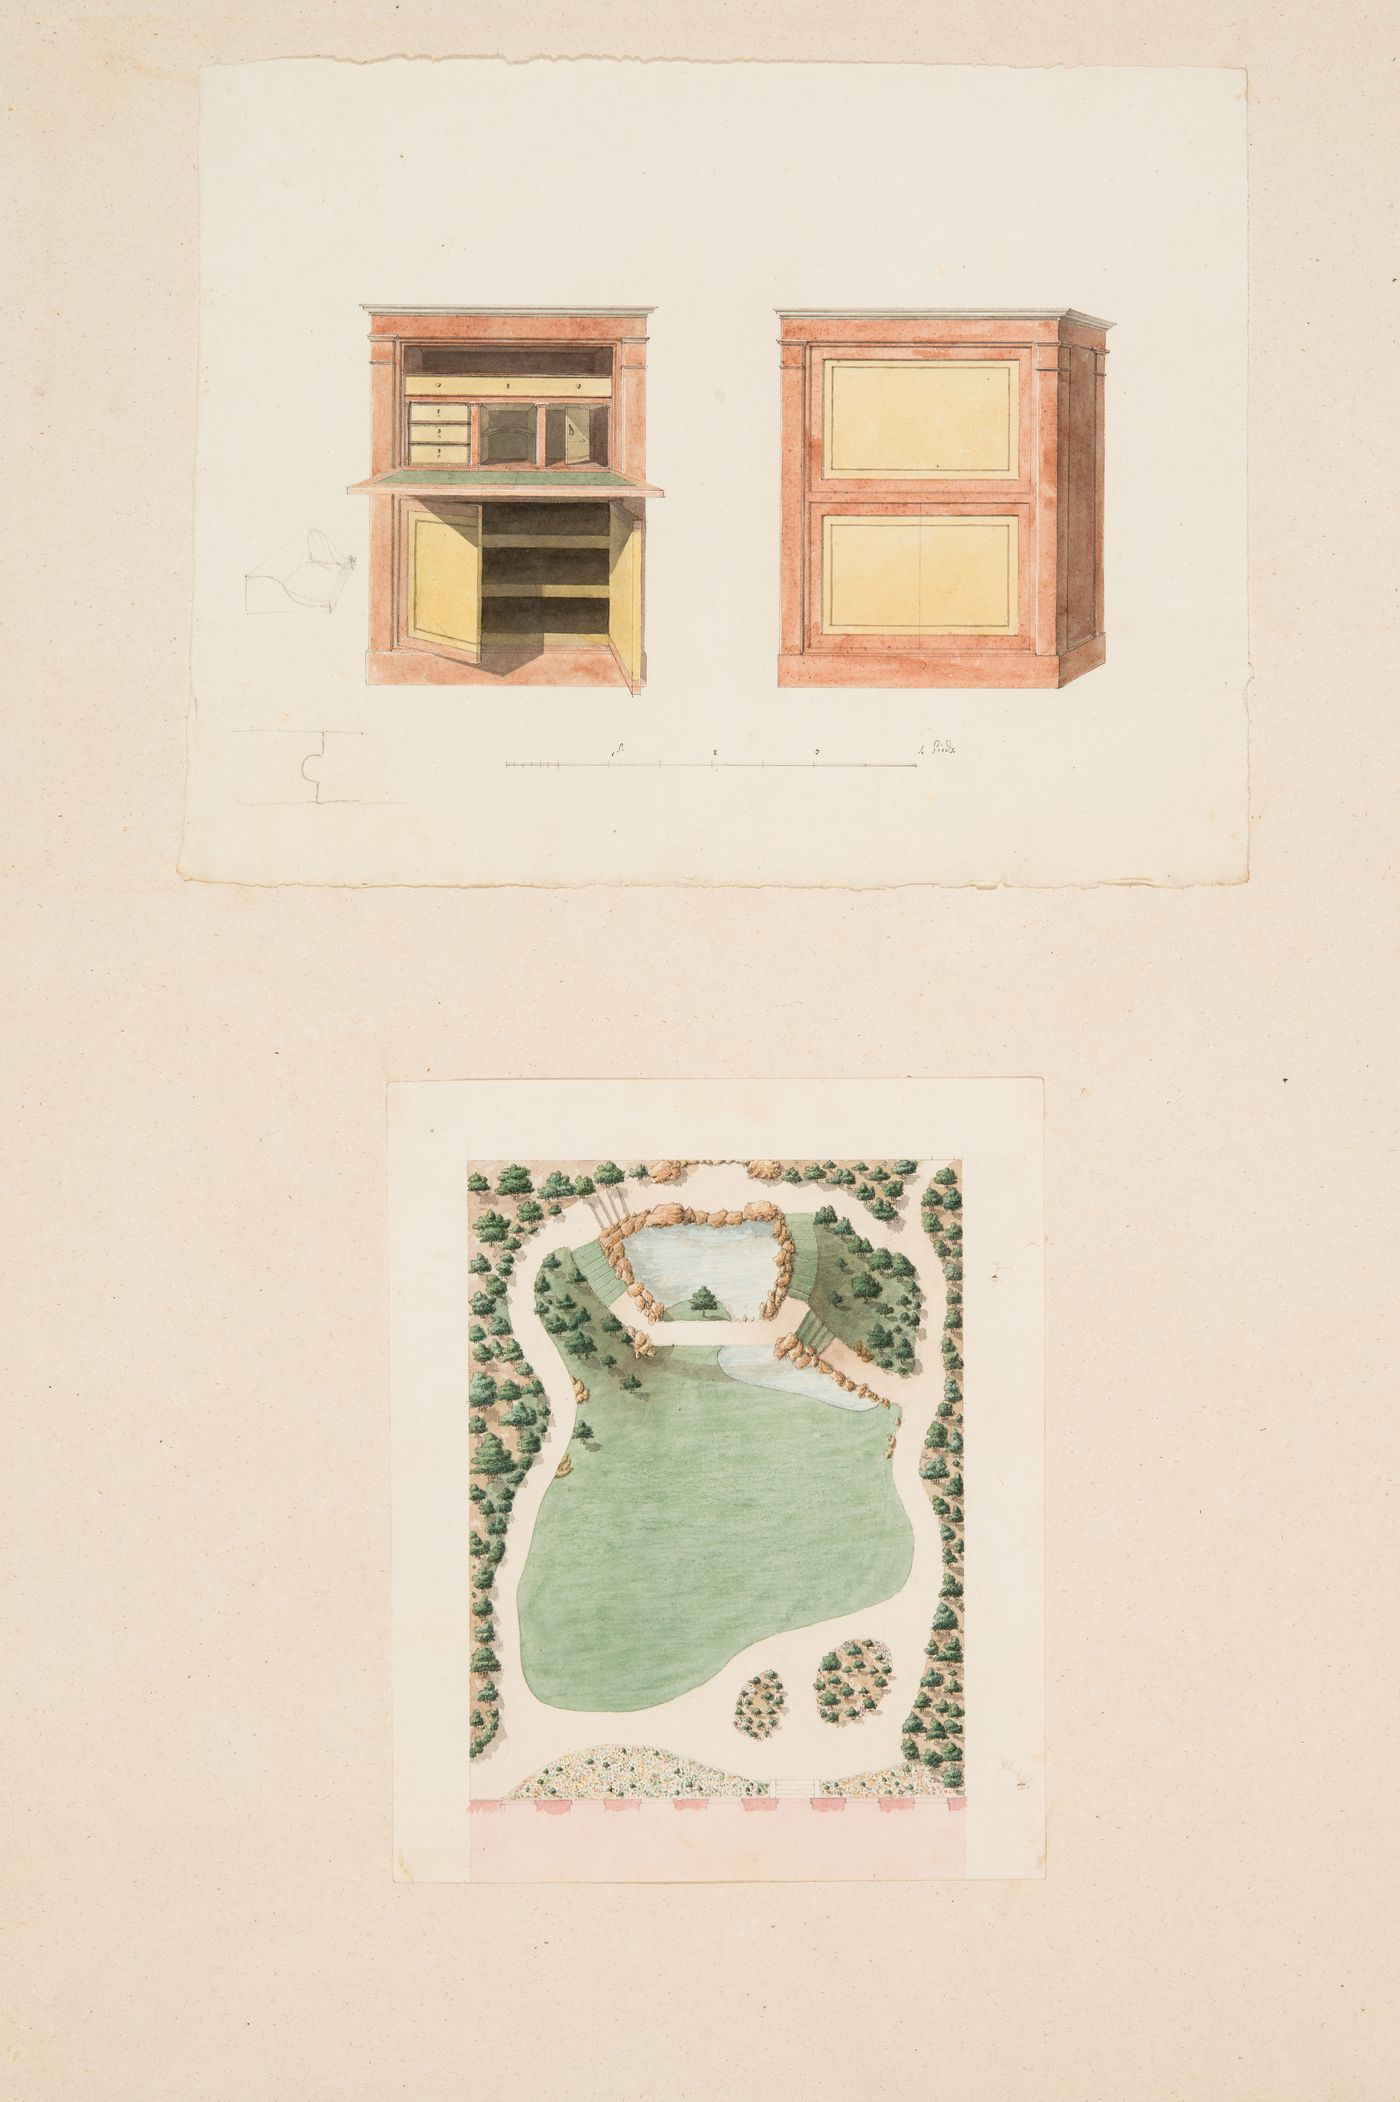 Axonometric drawings for a drop-front desk, possibly for M. le Dhuy; Project for renovations for a house for M. le Dhuy: Plan for the garden